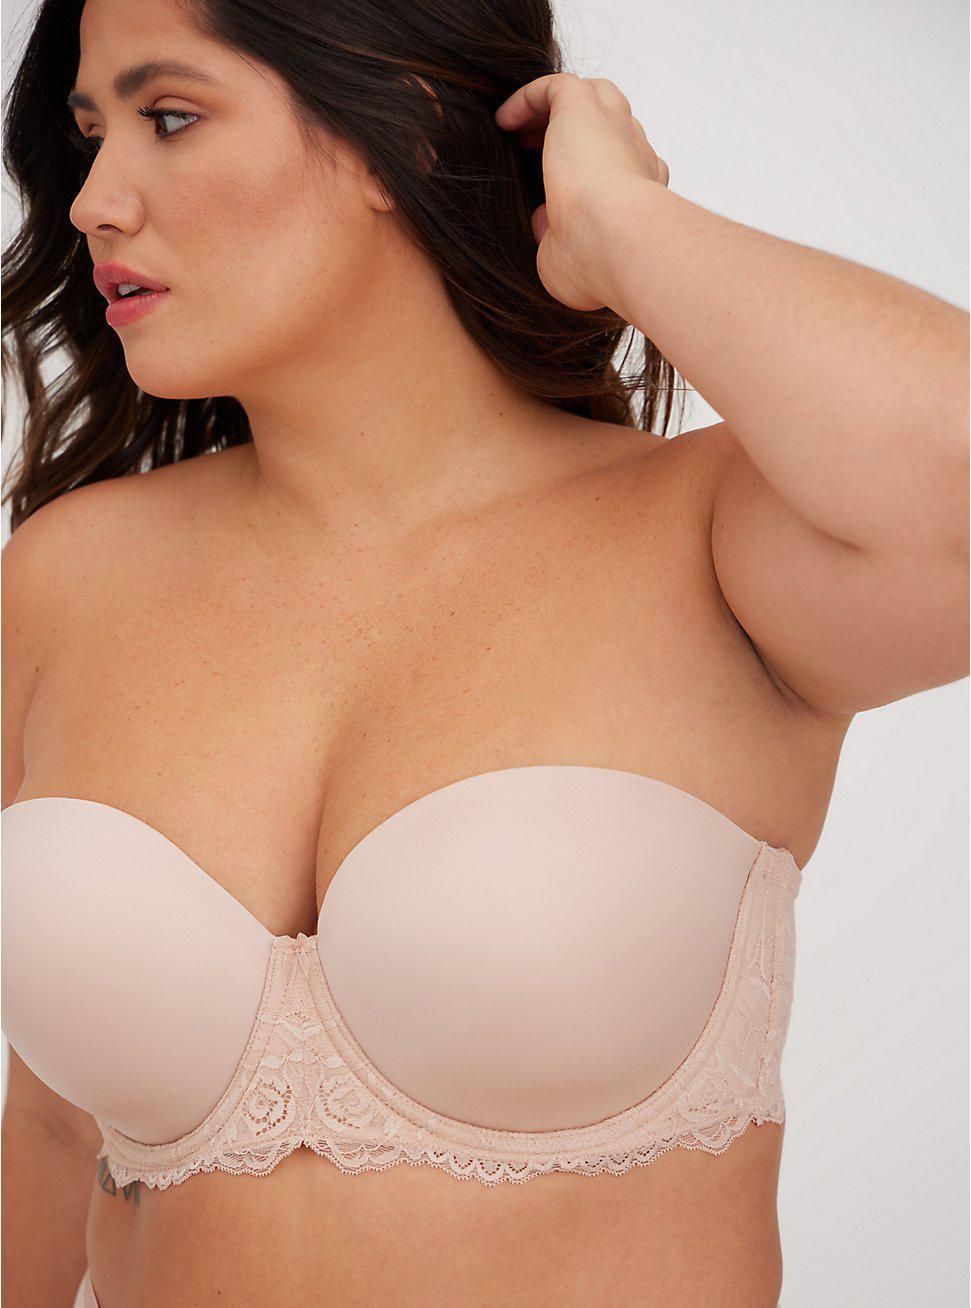 This Strapless Bra Hack Gives You the Most Support